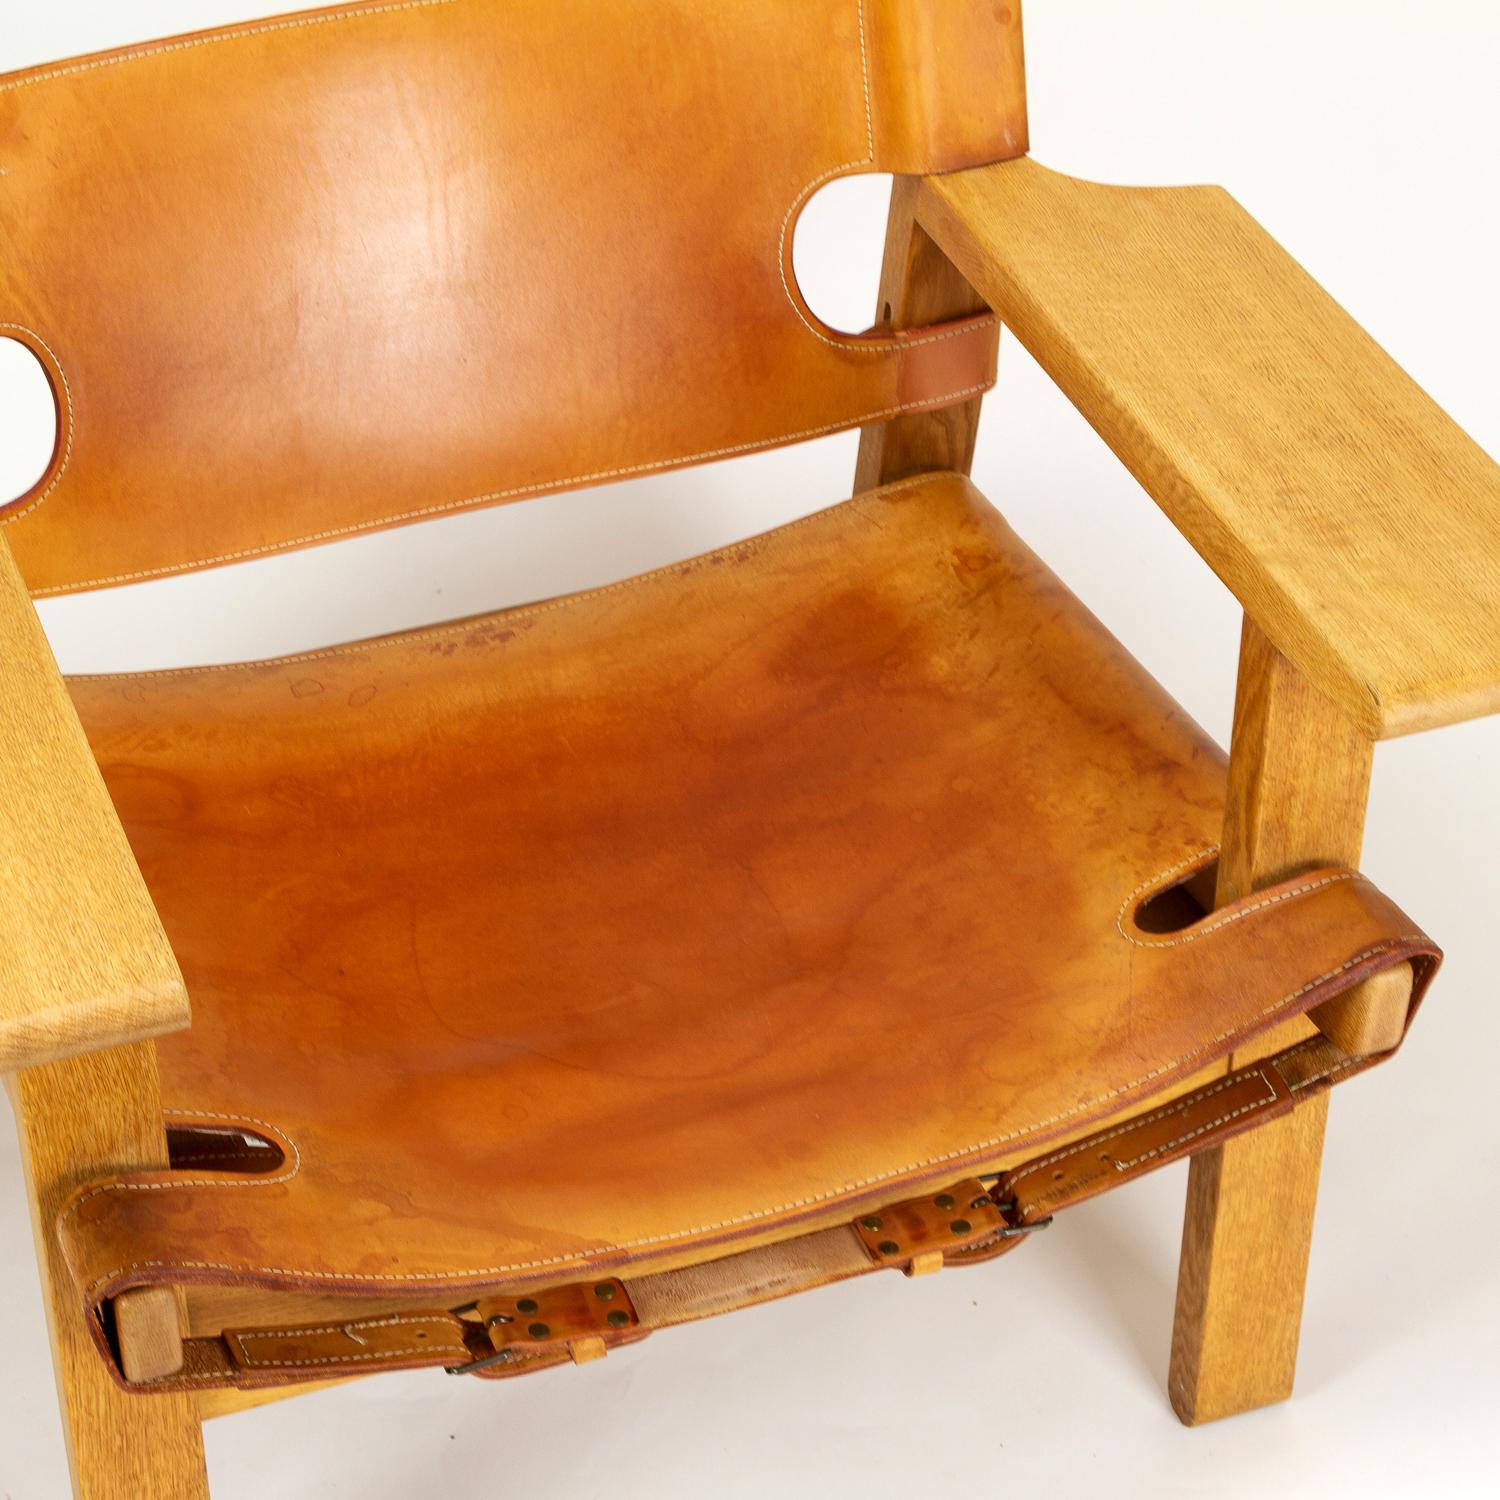 Hand-Crafted Spanish Chair Model BM2226 by Børge Mogensen for Fredericia, Denmark, 1960s